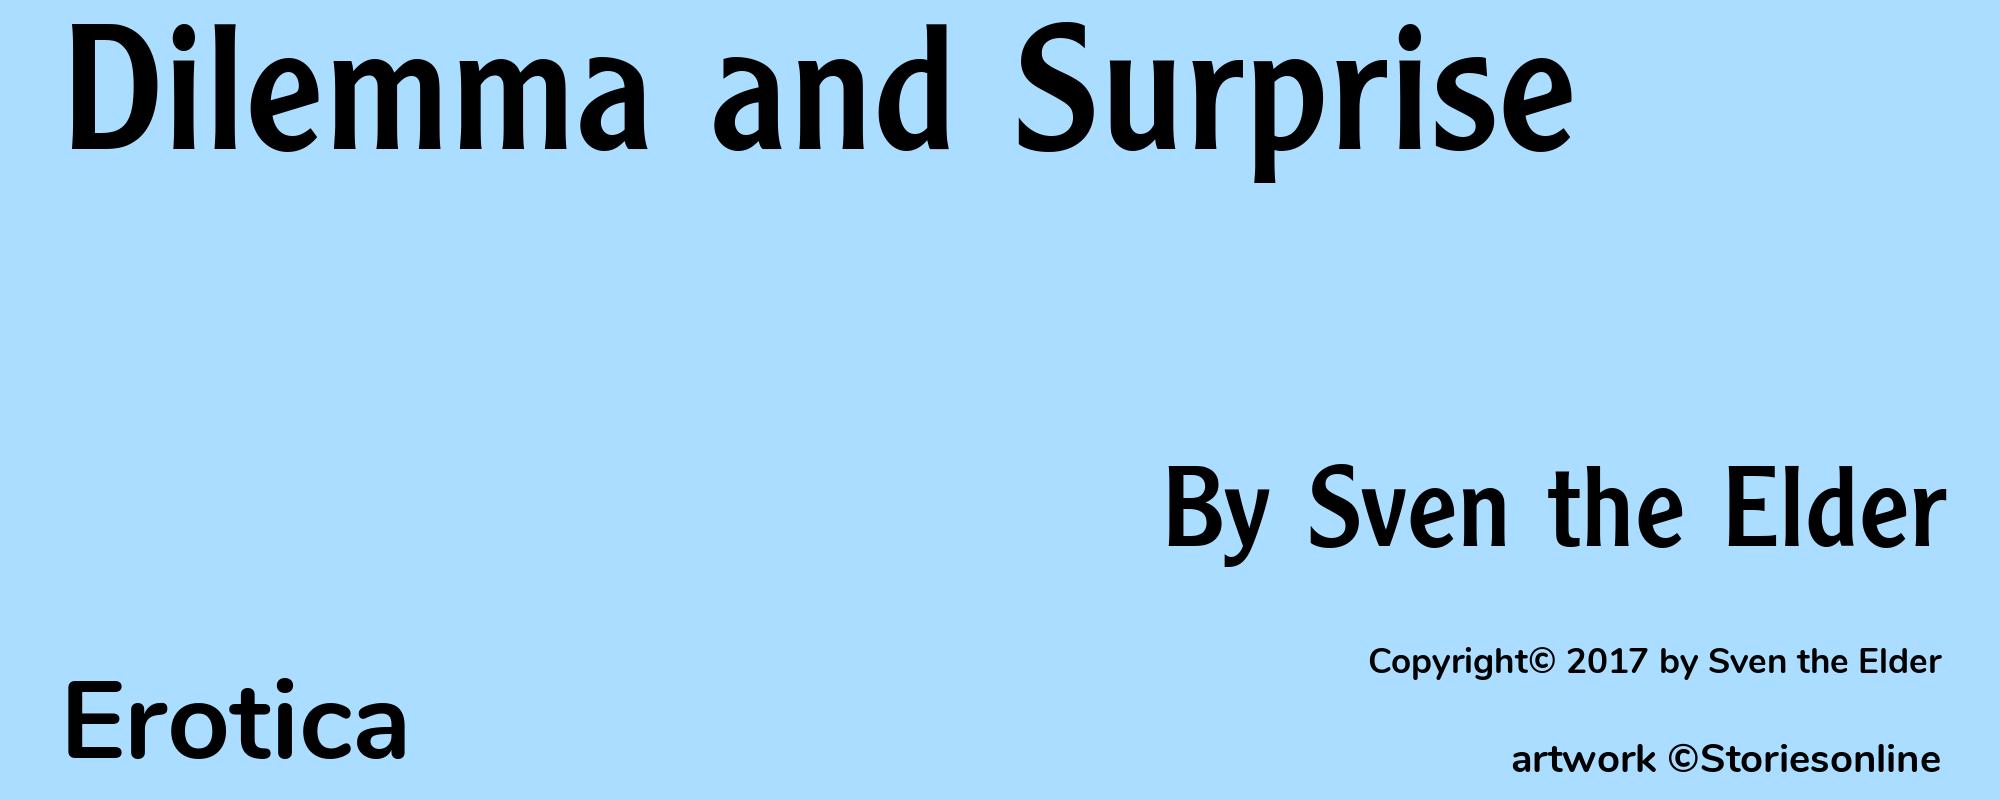 Dilemma and Surprise - Cover